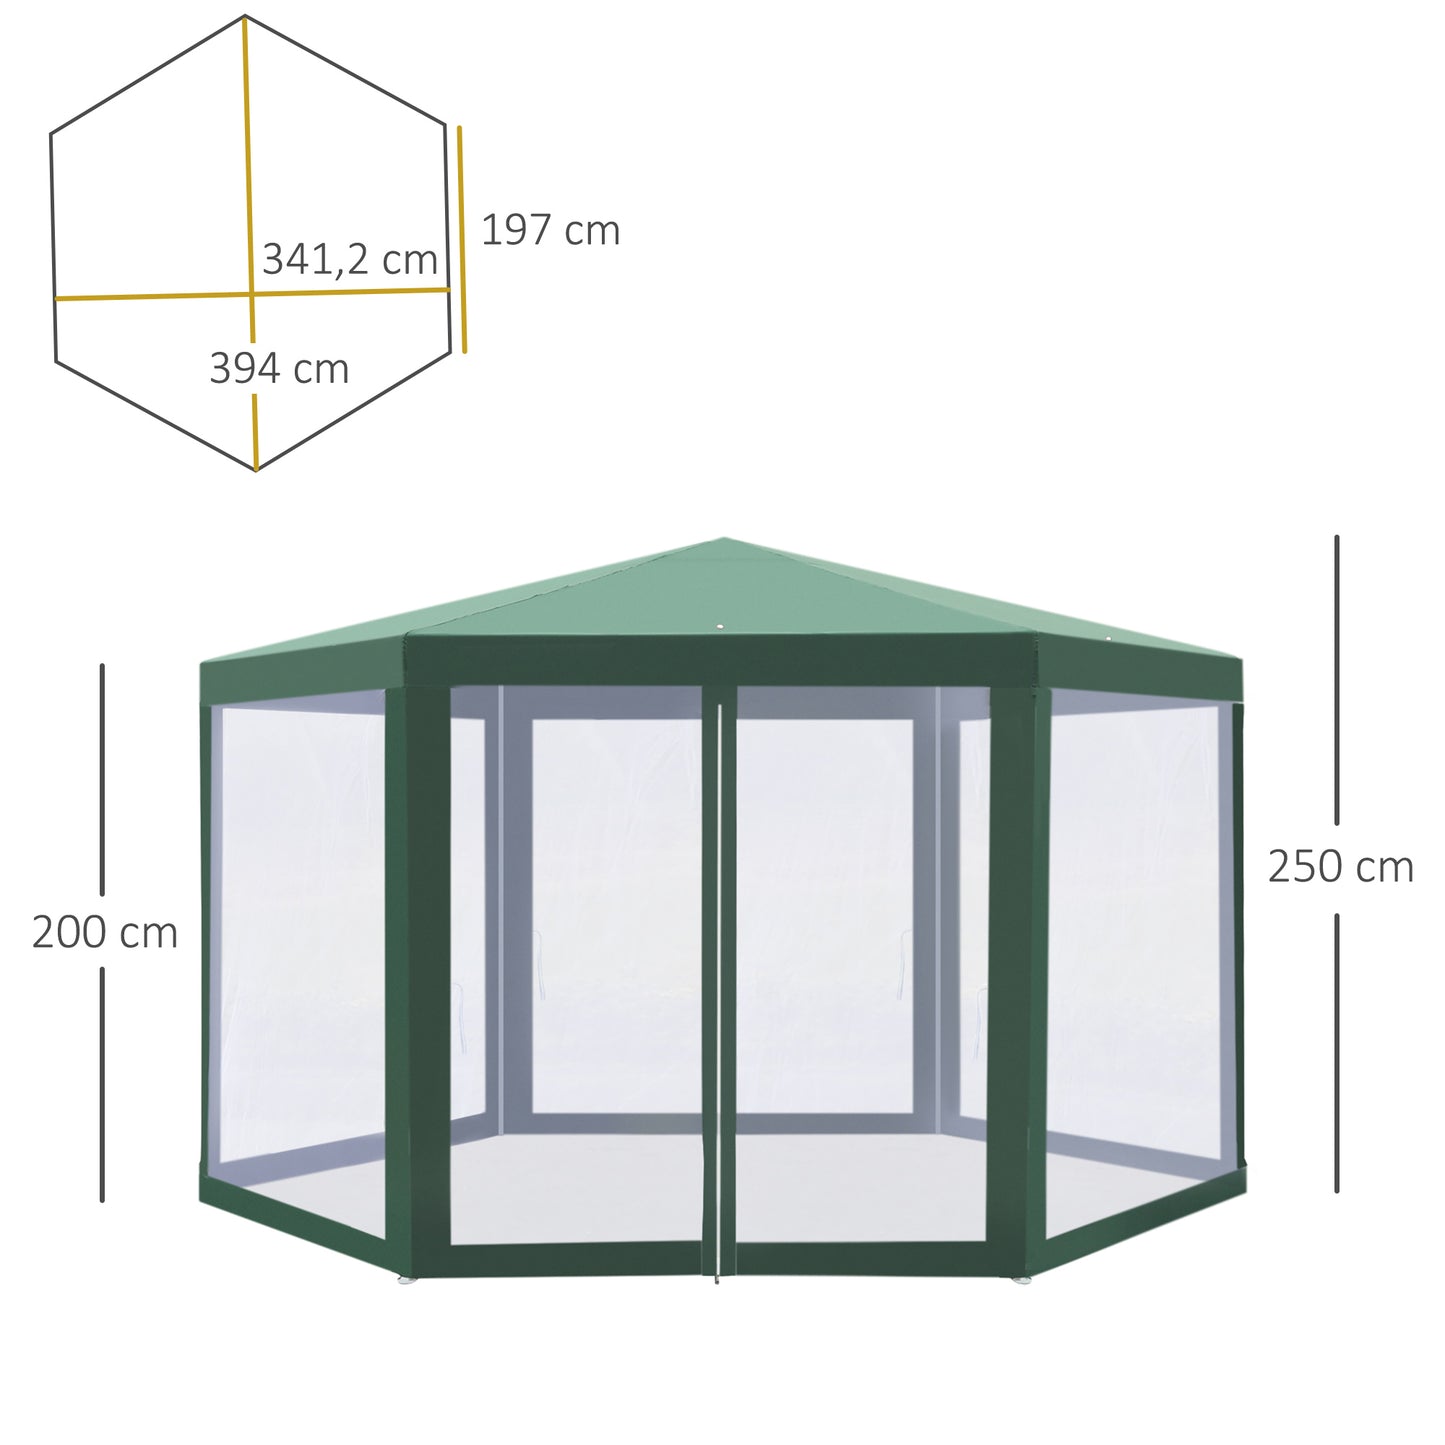 Outsunny Netting Gazebo Hexagon Tent Patio Canopy Outdoor Shelter Party Activities Shade Resistant (Green)